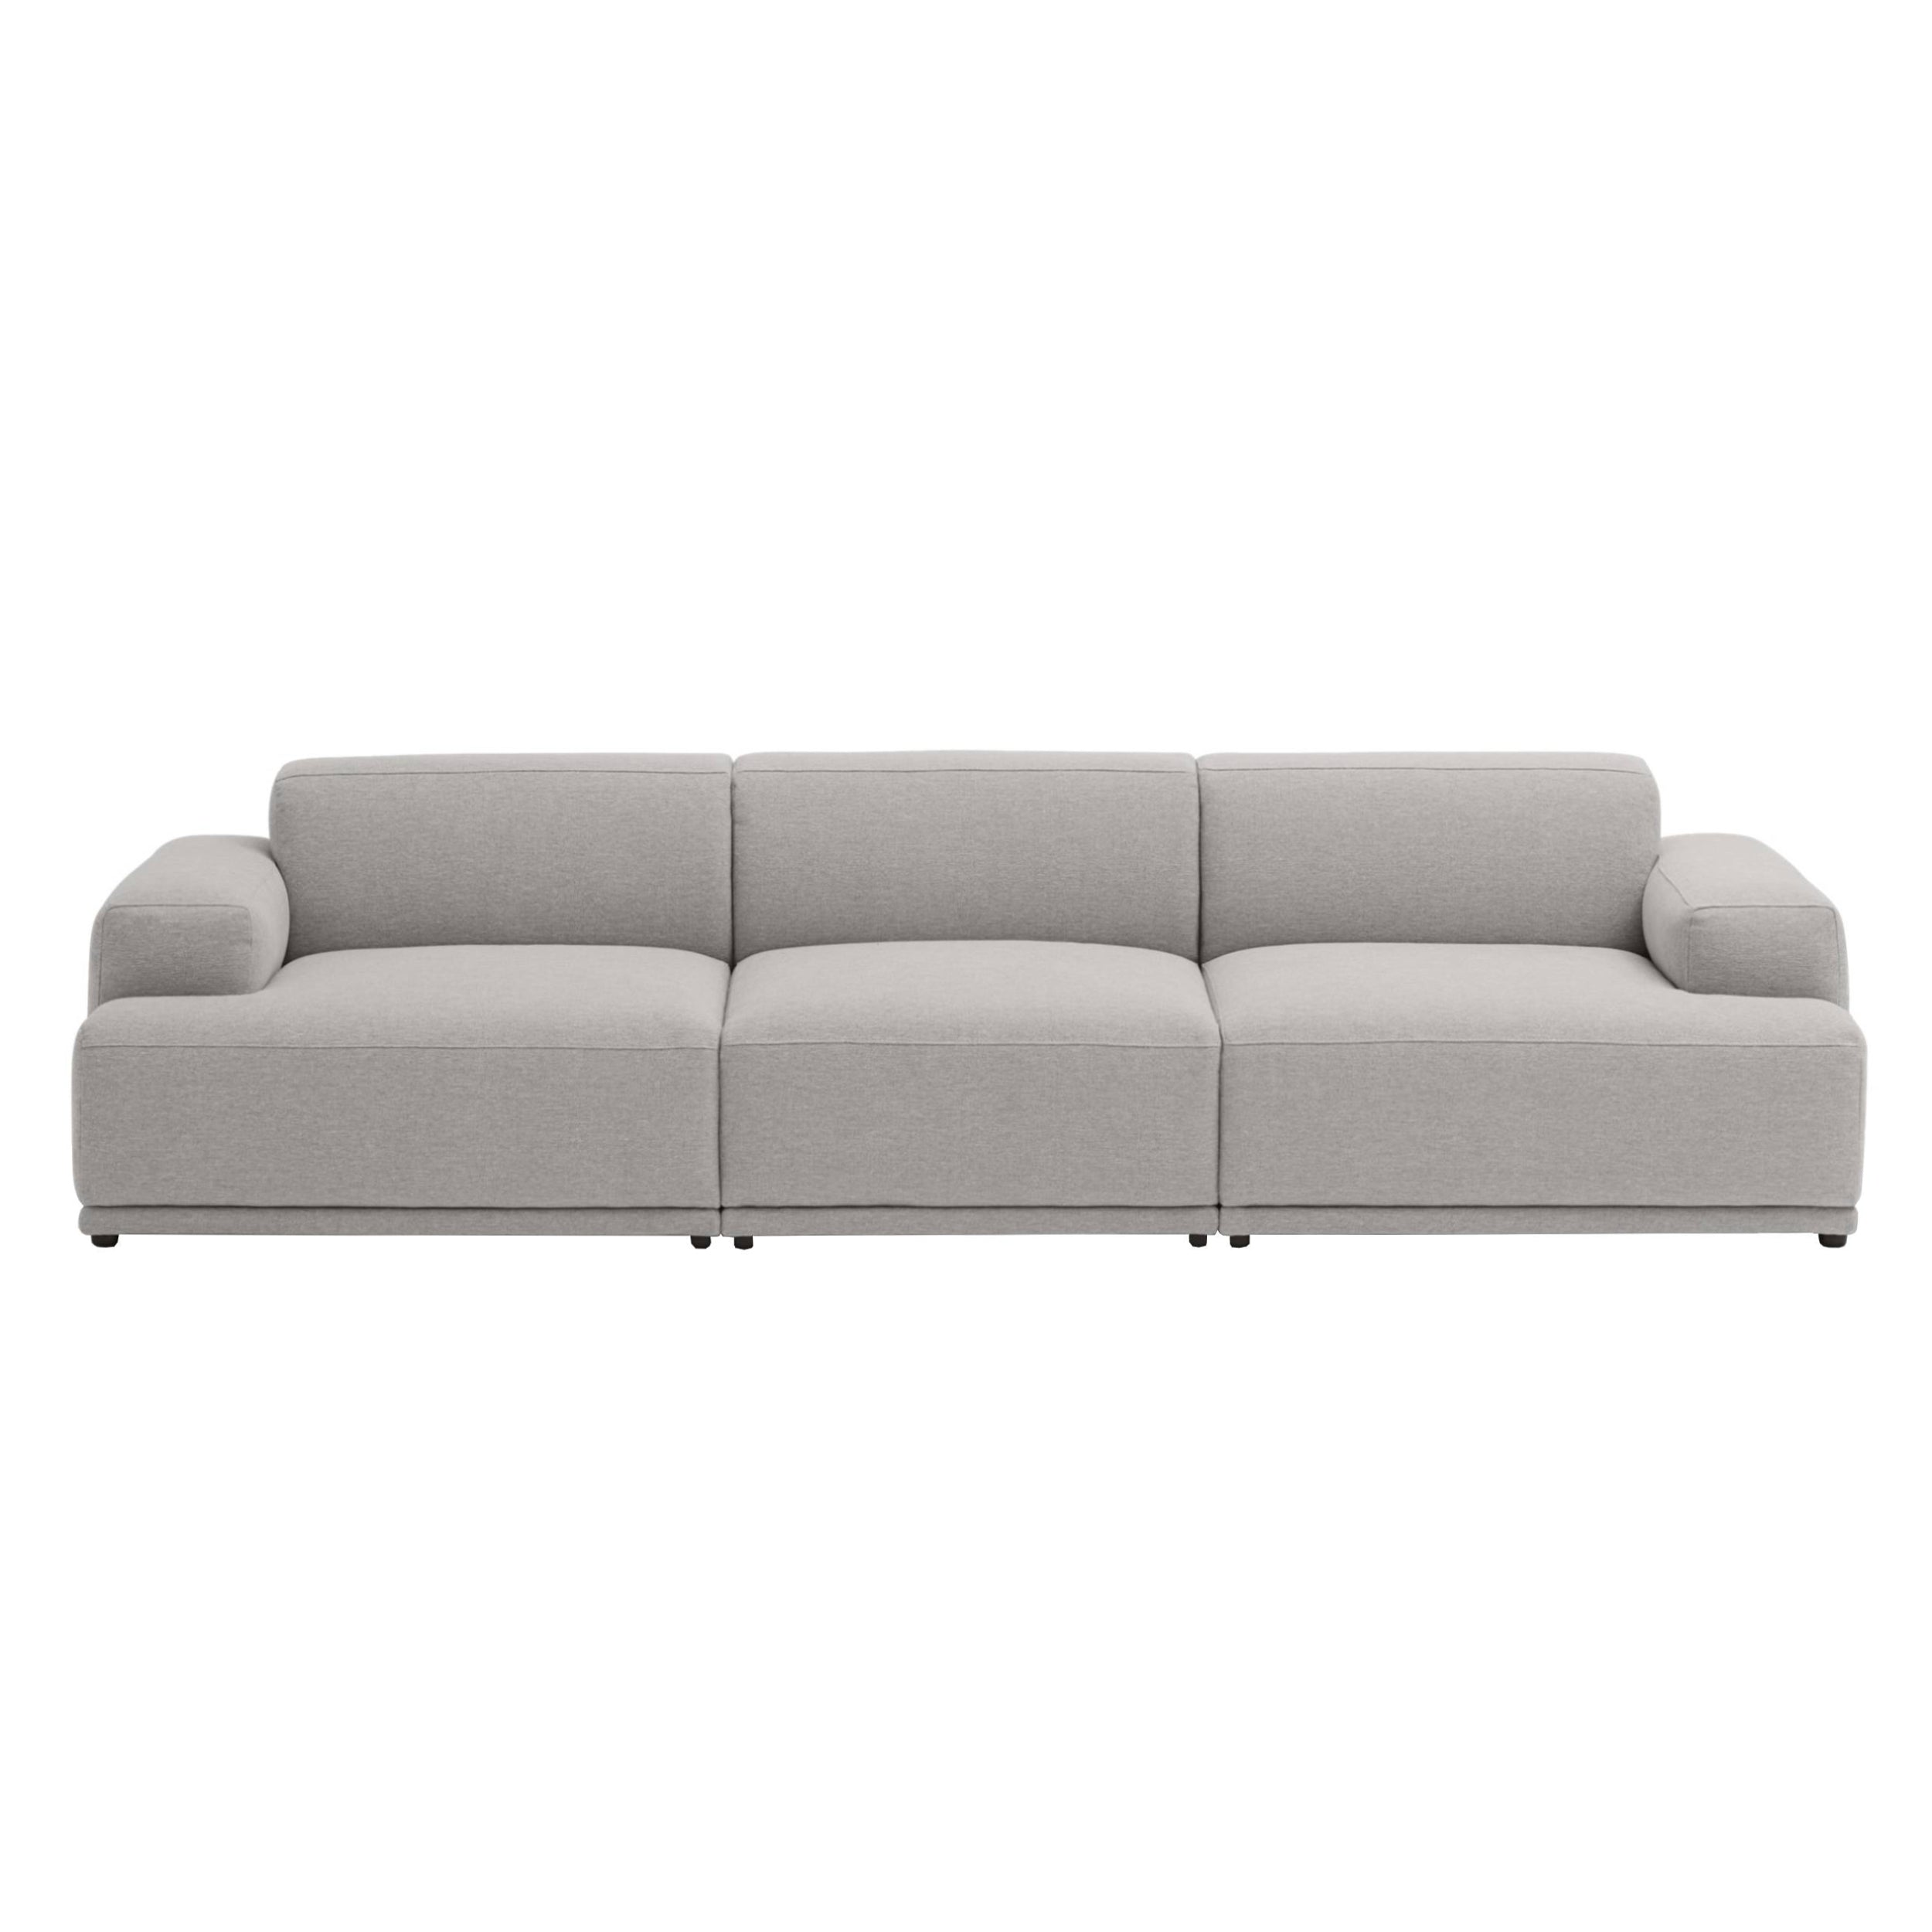 Connect Soft Modular Sofa: 3 Seater + Configuration 1 + Clay 12